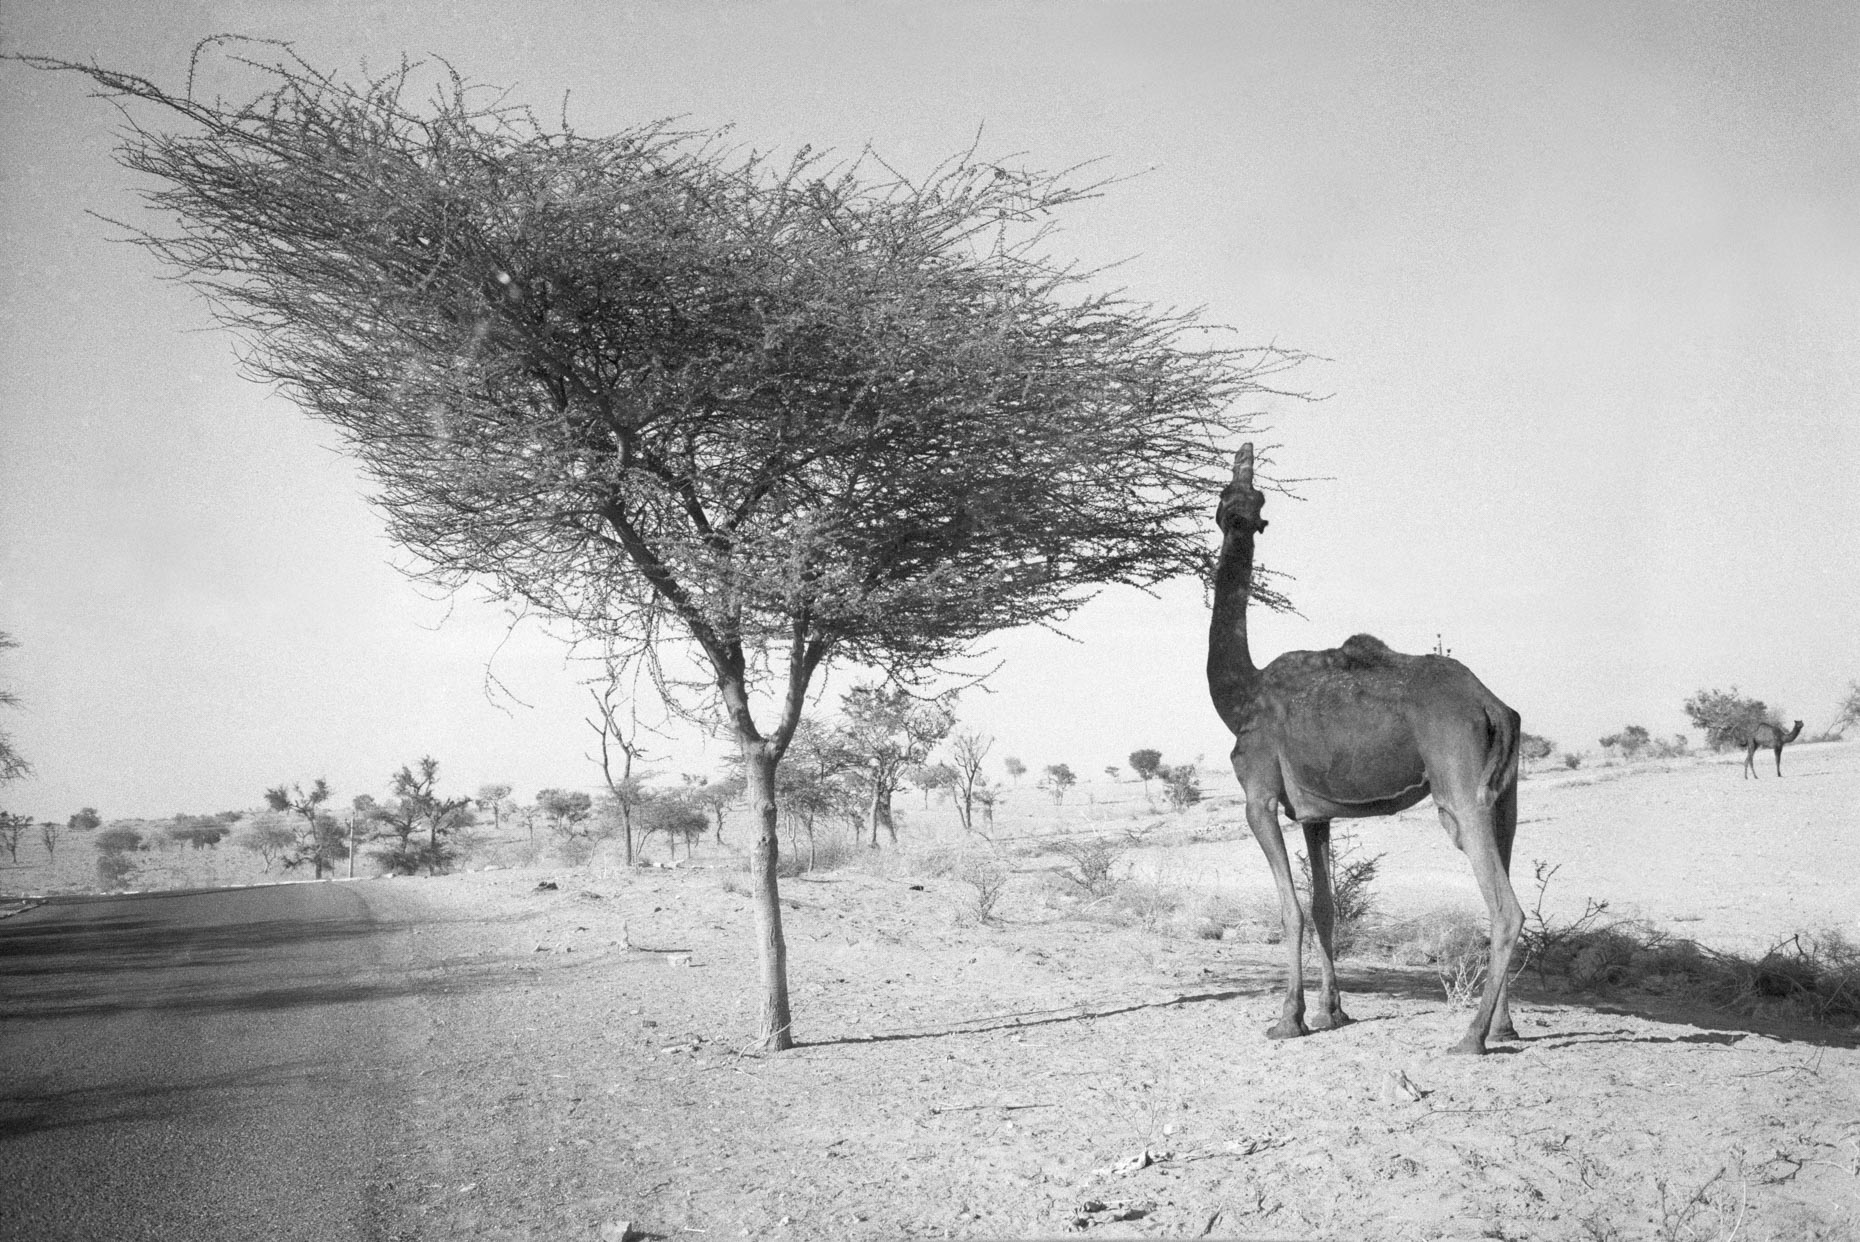 Camel, Tree and Road, Rajasthan